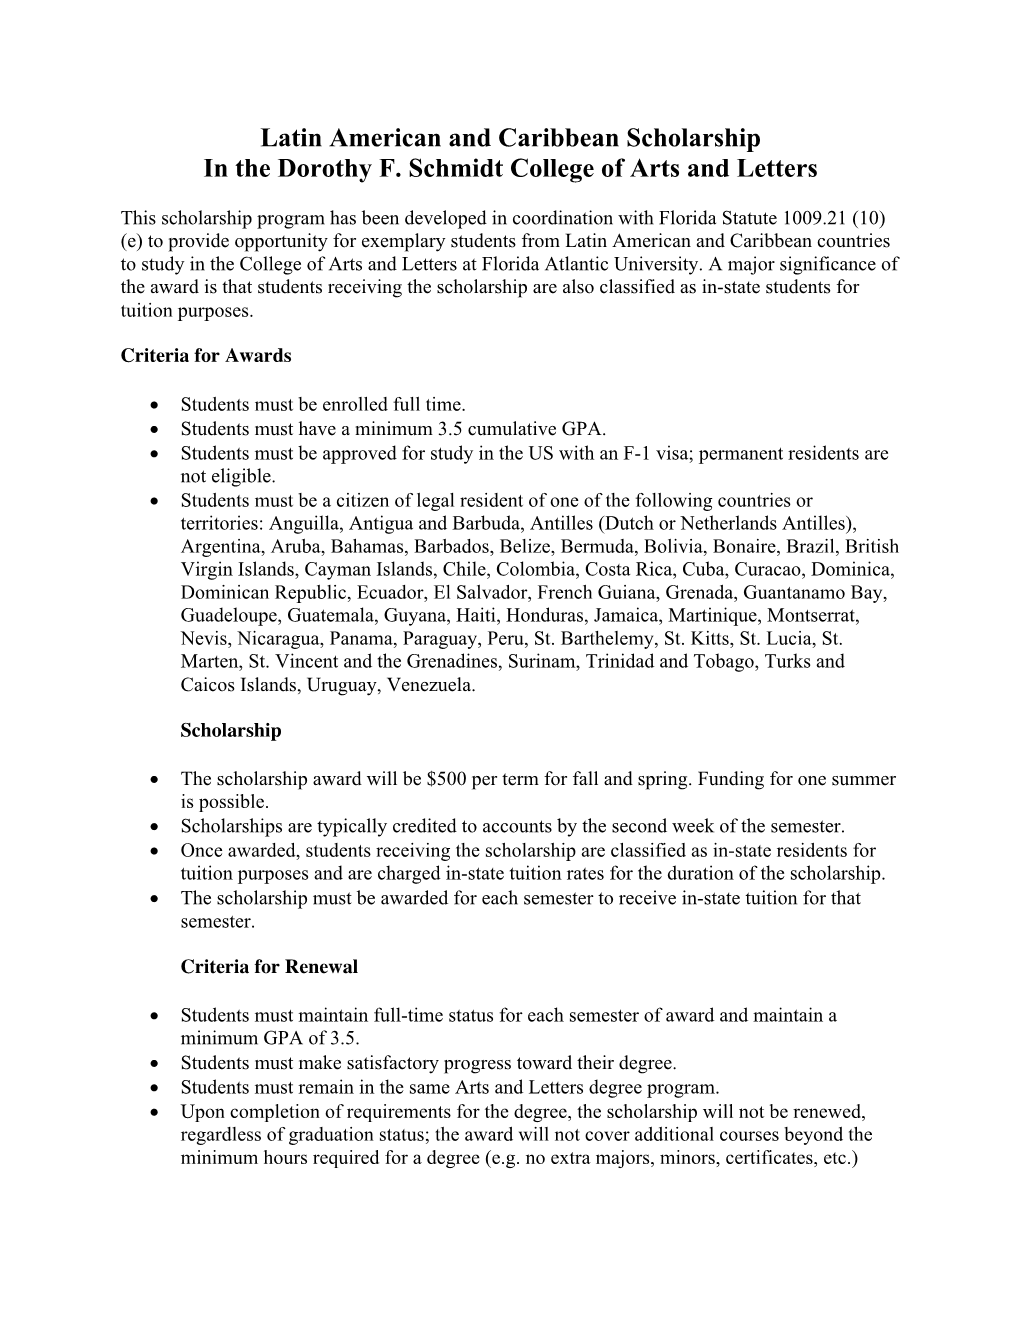 Latin American and Caribbean Scholarship in the Dorothy F. Schmidt College of Arts and Letters